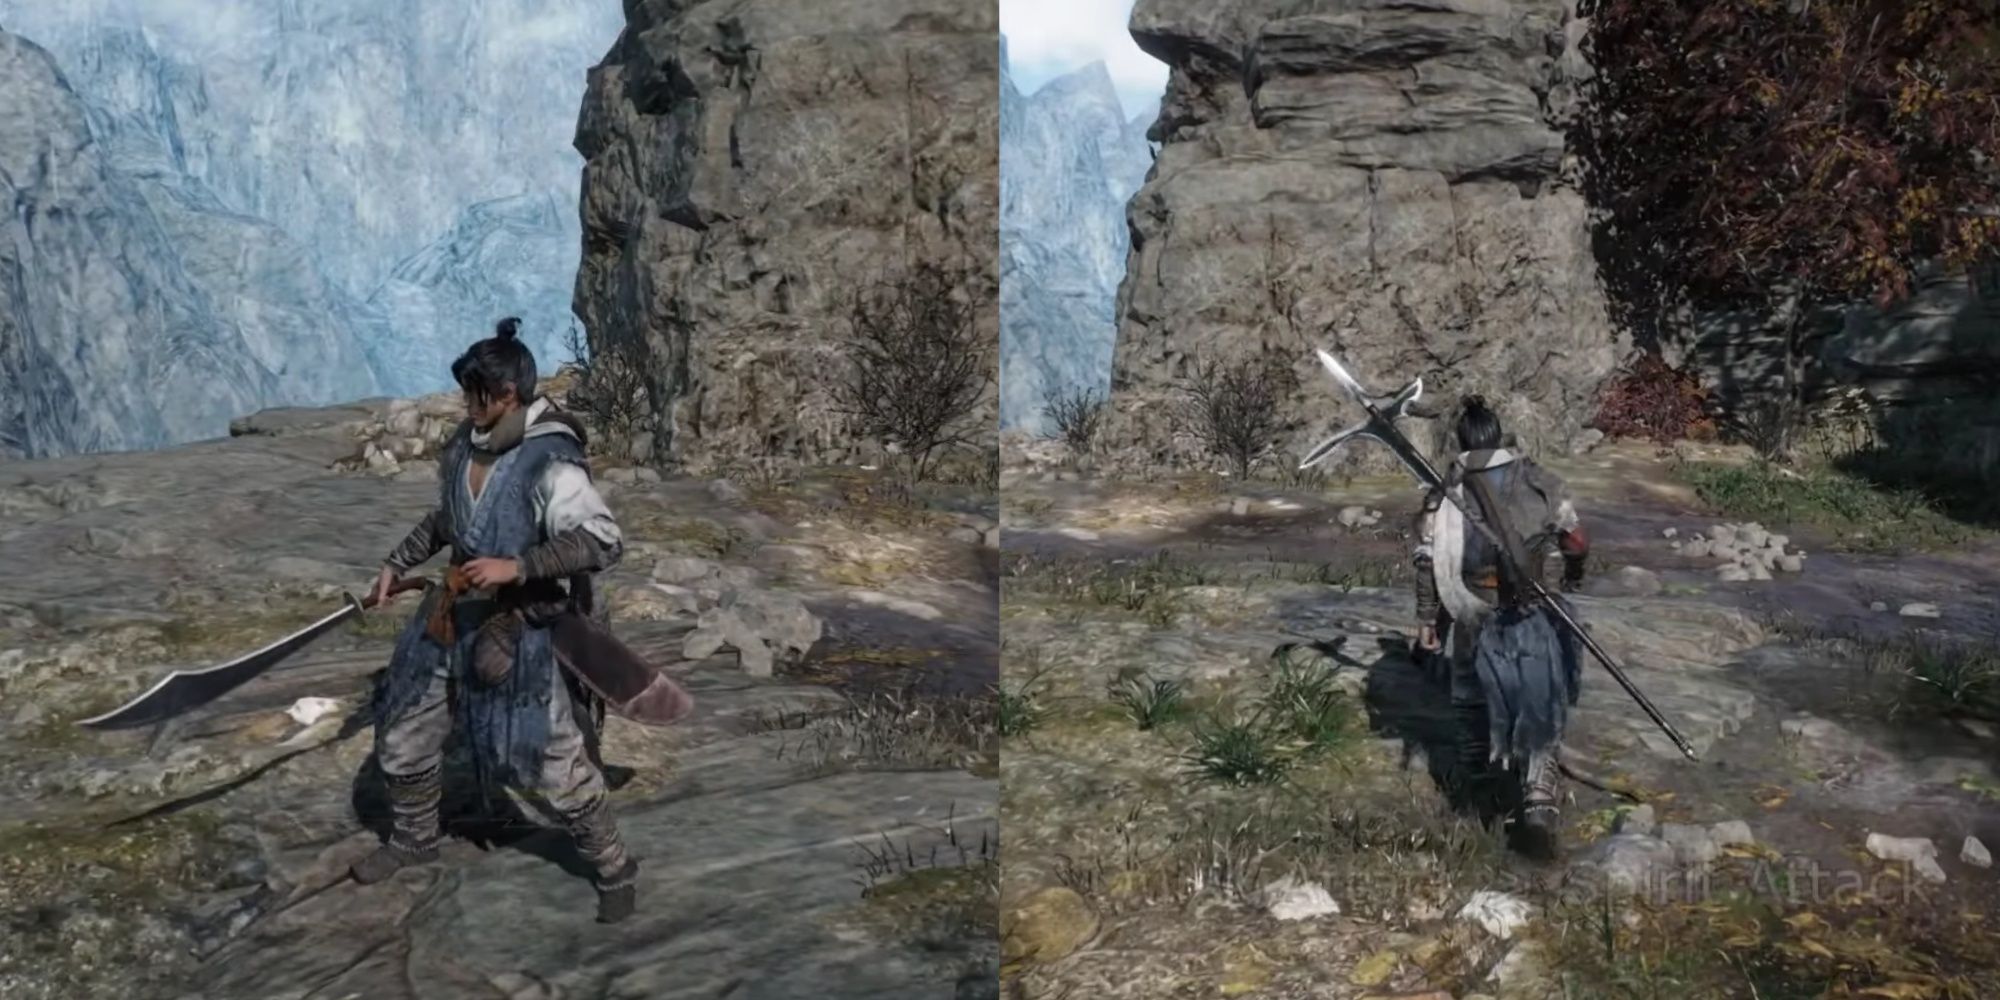 Wo Long Fallen Dynasty screenshots of the main character wielding a curved saber (left) and halberd (right).